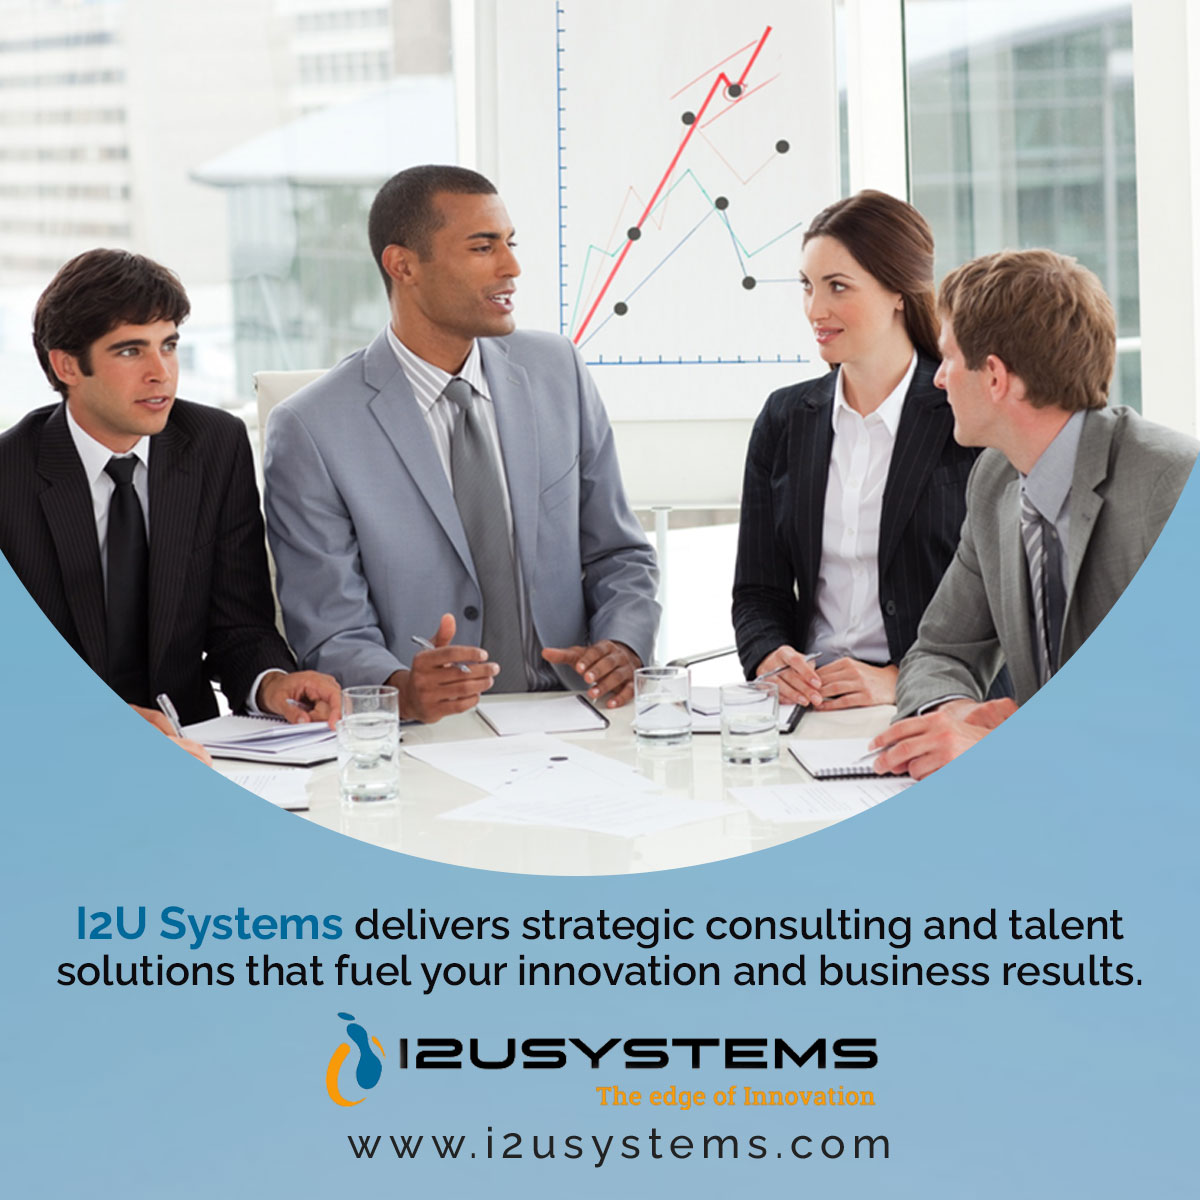 I2U Systems delivers strategic consulting and talent solutions that fuel your innovation and business results. #i2usystems #c2crequirements #w2jobs #directclient #stategovernment #jobs #recruiters #benchsales #IOT #consulting #talent #solutions #innovation #business